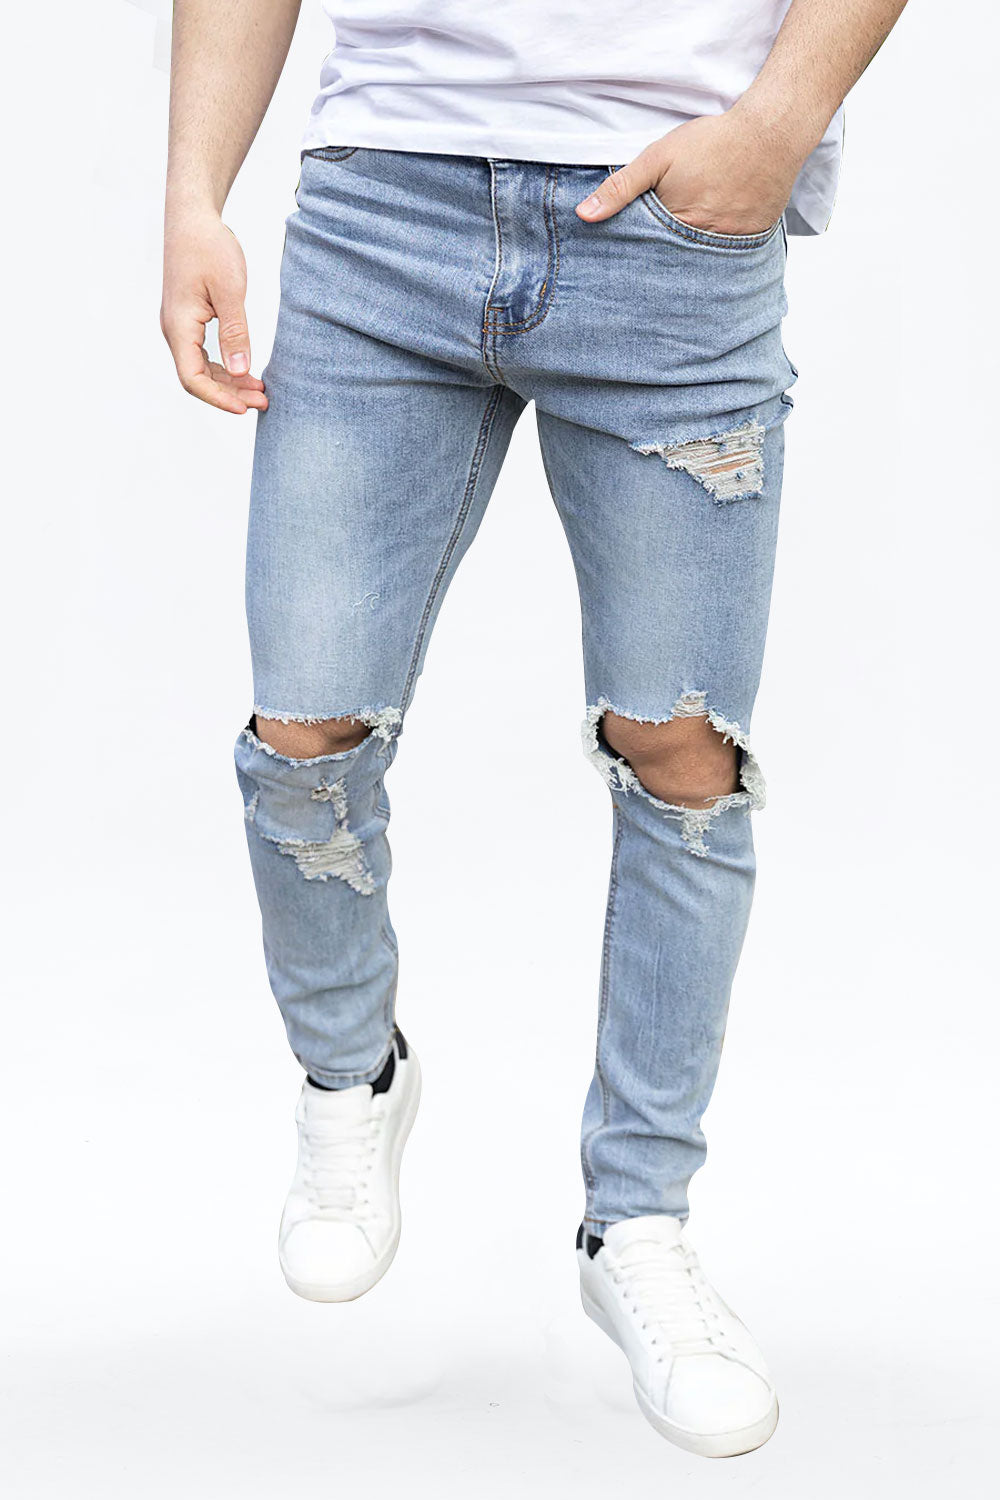 Gingtto Men Light Blue Jeans With Rapped Skinny Denim